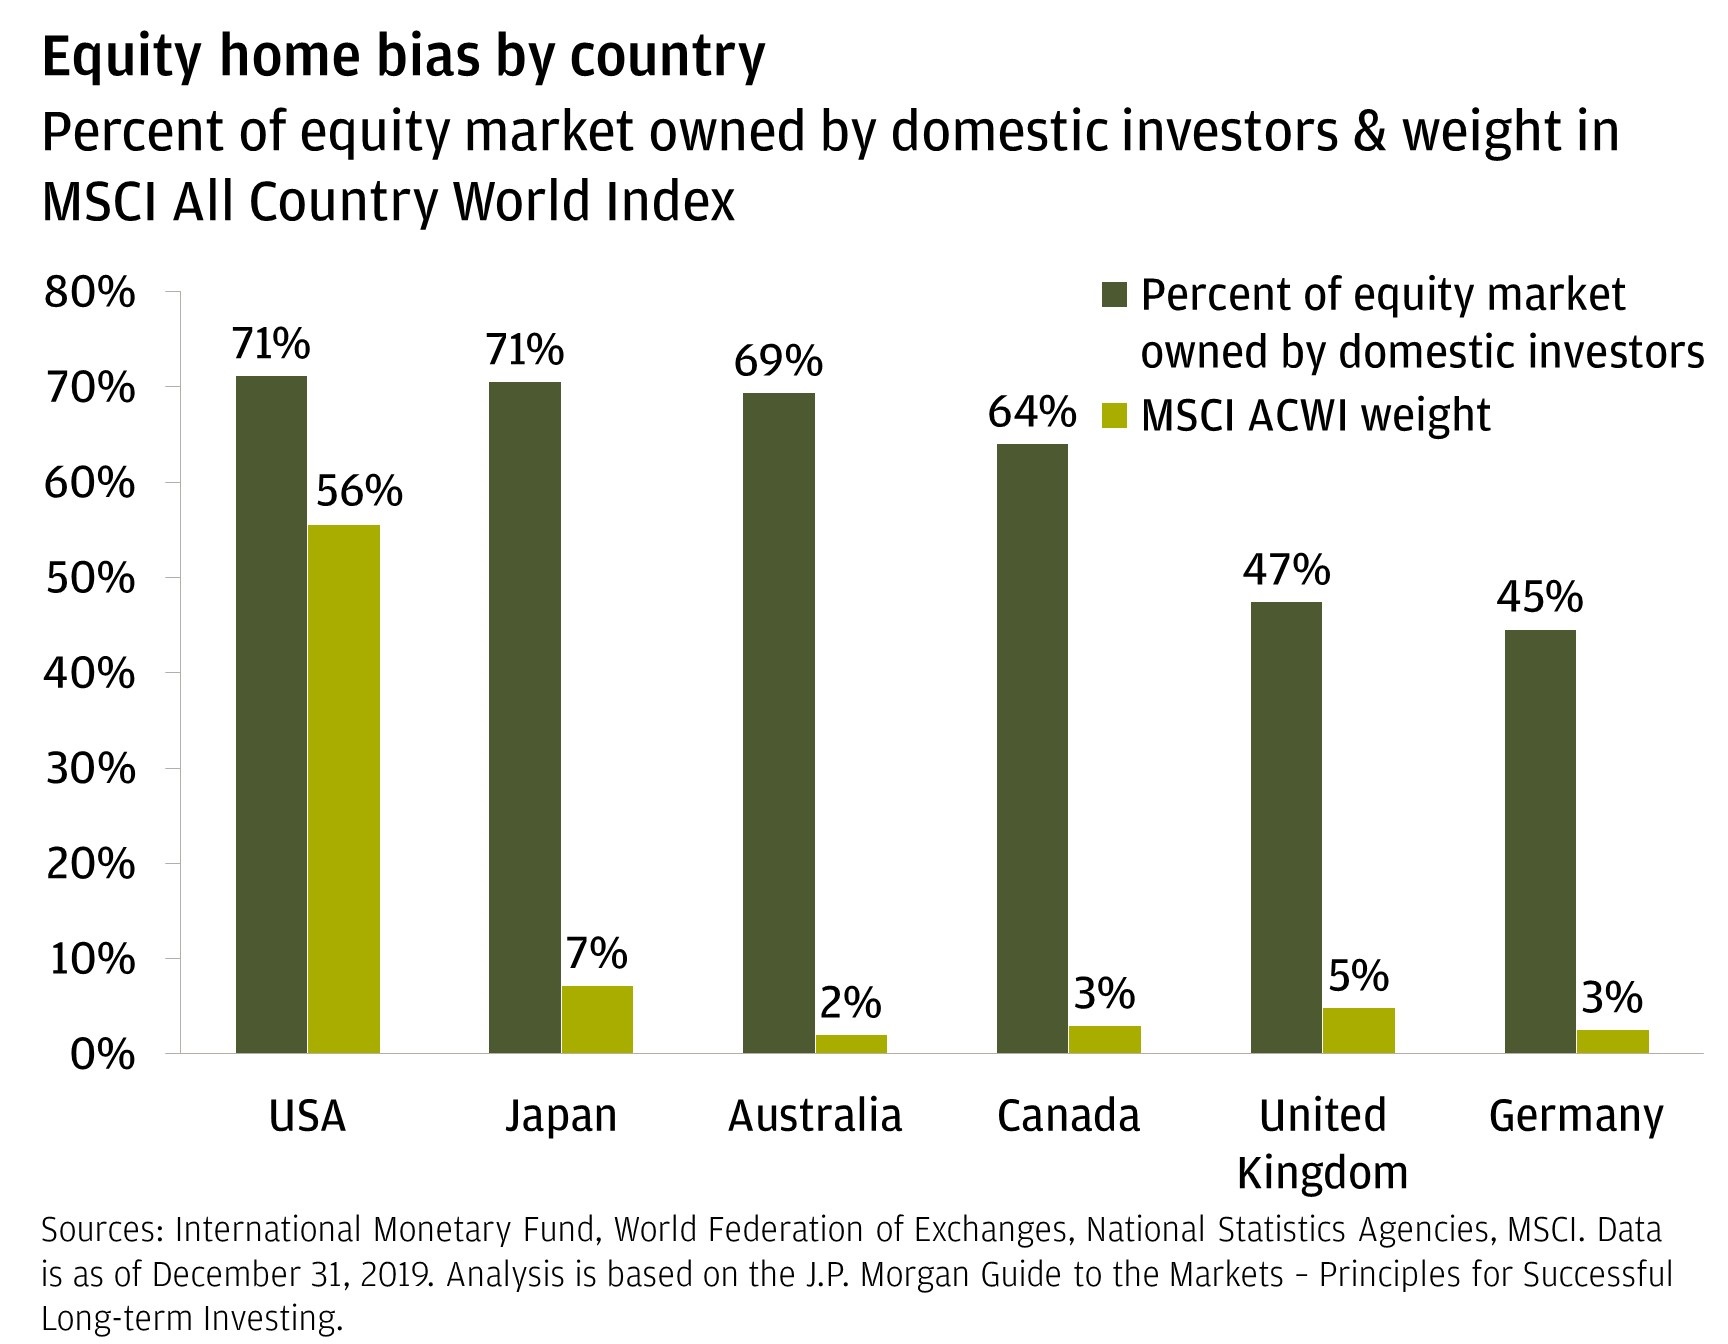 The chart shows the percent of the equity market owned by domestic investors and the MSCI ACWI weight for that market as of December 31, 2019, for the United States, Japan, Australia, Canada, the United Kingdom and Germany. The charts shows that the percent of the equity market owned by domestic investors is 71% in the United States, 71% in Japan, 69% in Australia, 64% in Canada, 47% in the United Kingdom, and 45% in Germany. The chart also shows that the weight of the All Country World Index of the United States is 56%, Japan is 7%, Australia is 2%, Canada is 3%, the United Kingdom is 5%, and Germany is 3%.